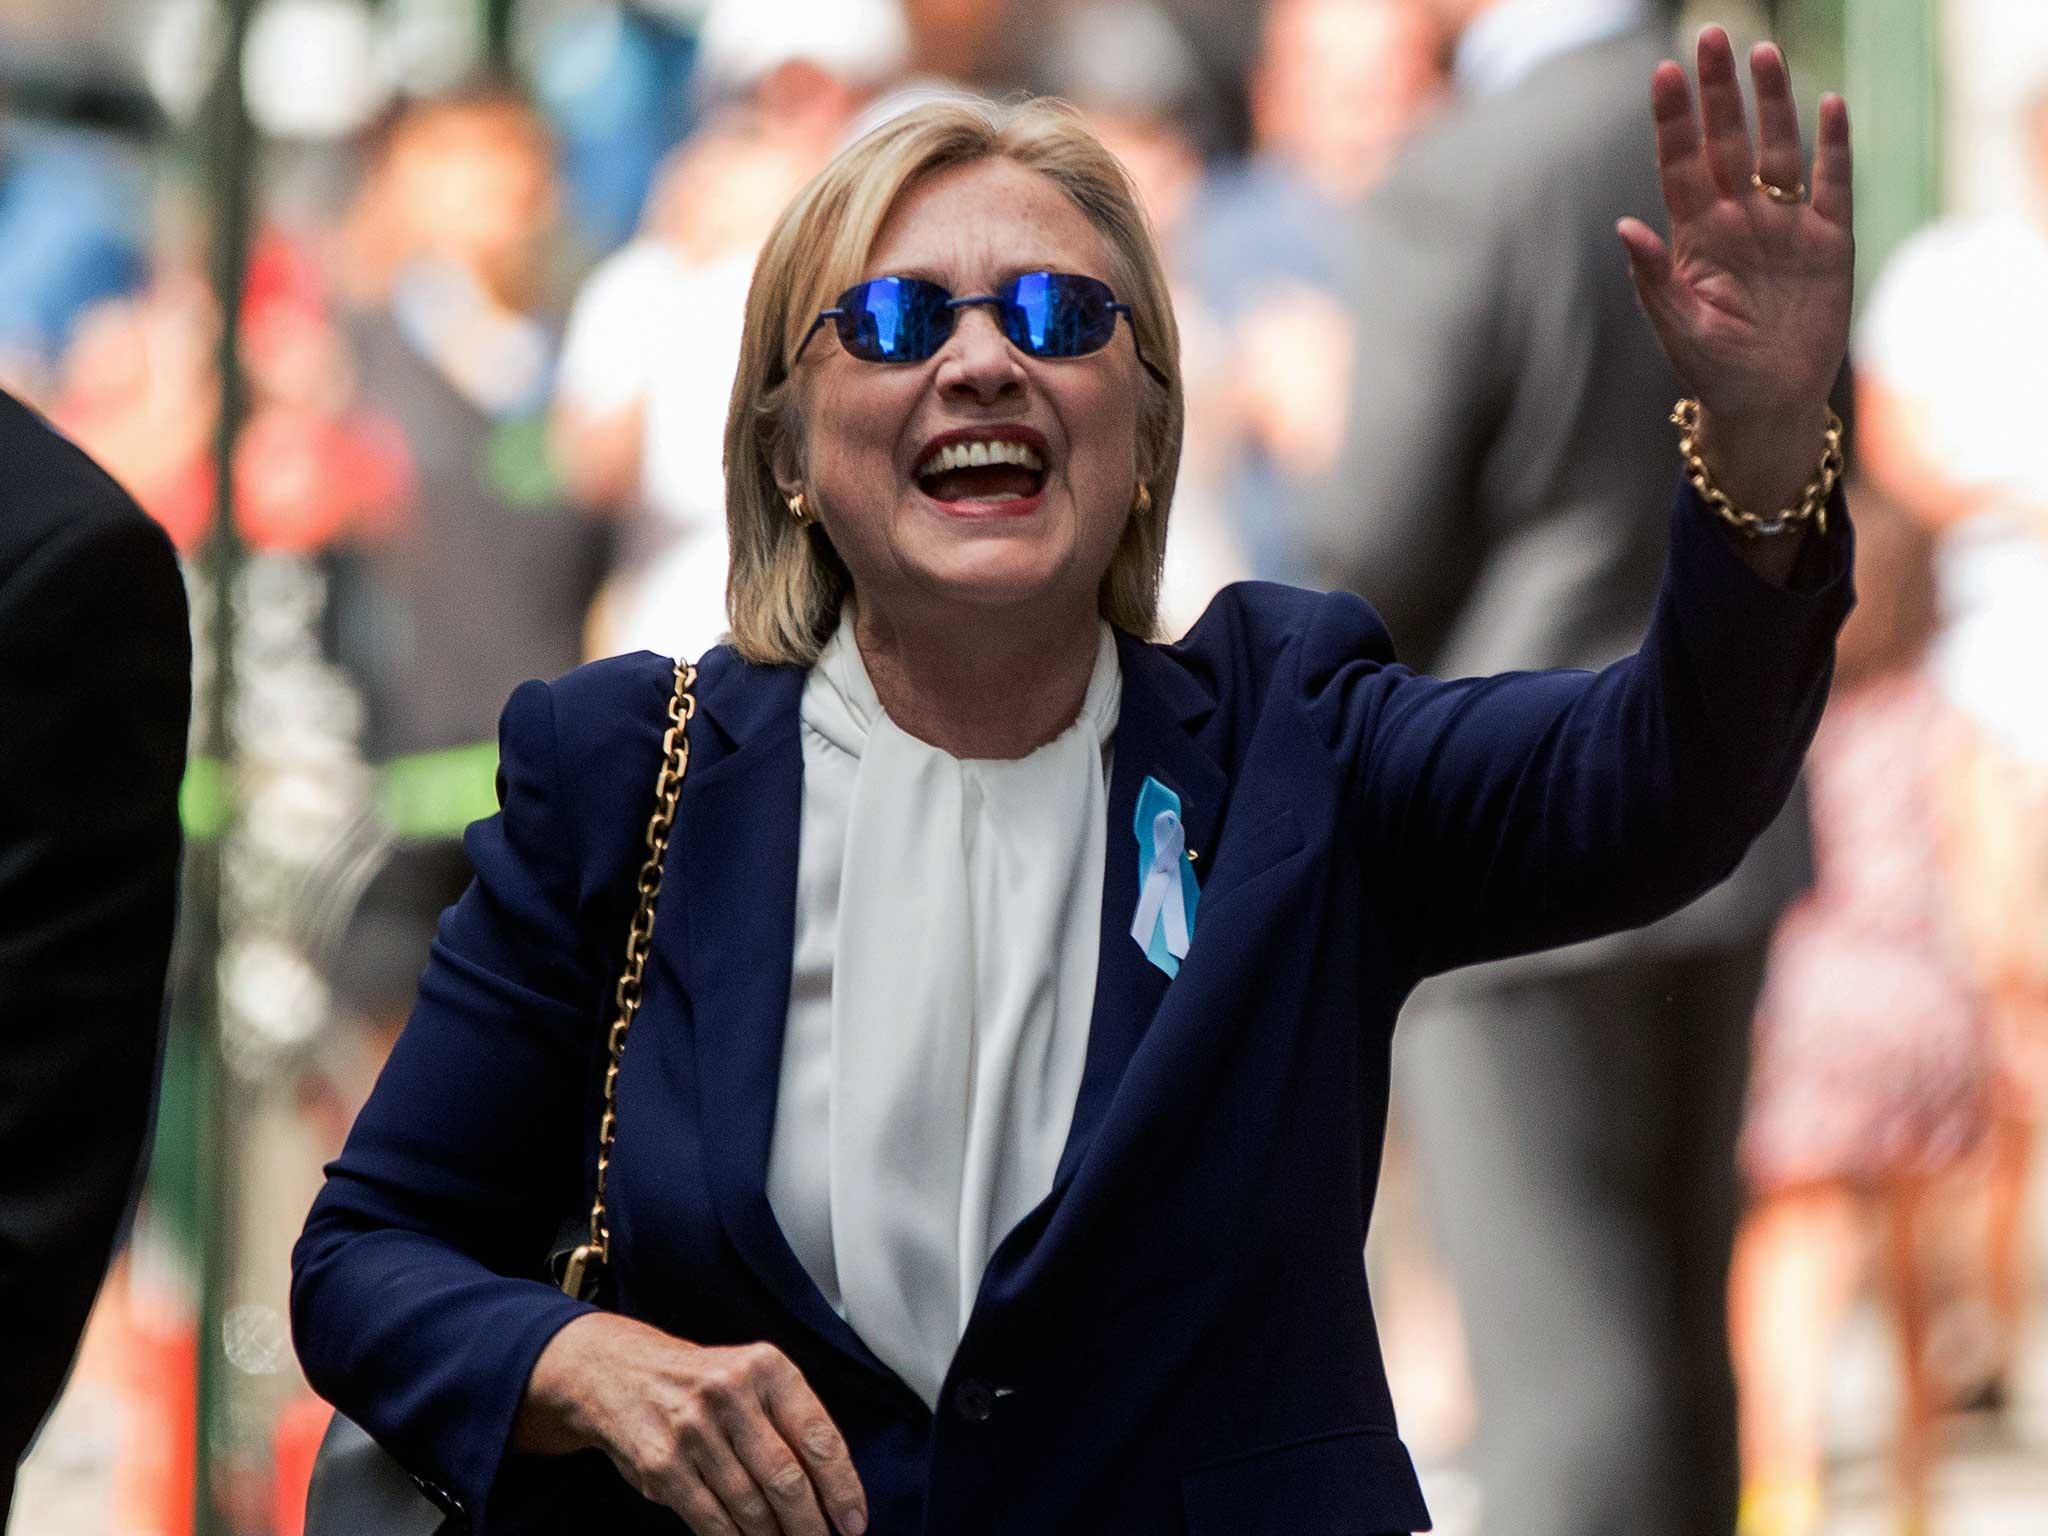 Hillary Clinton waves after leaving an apartment building in New York